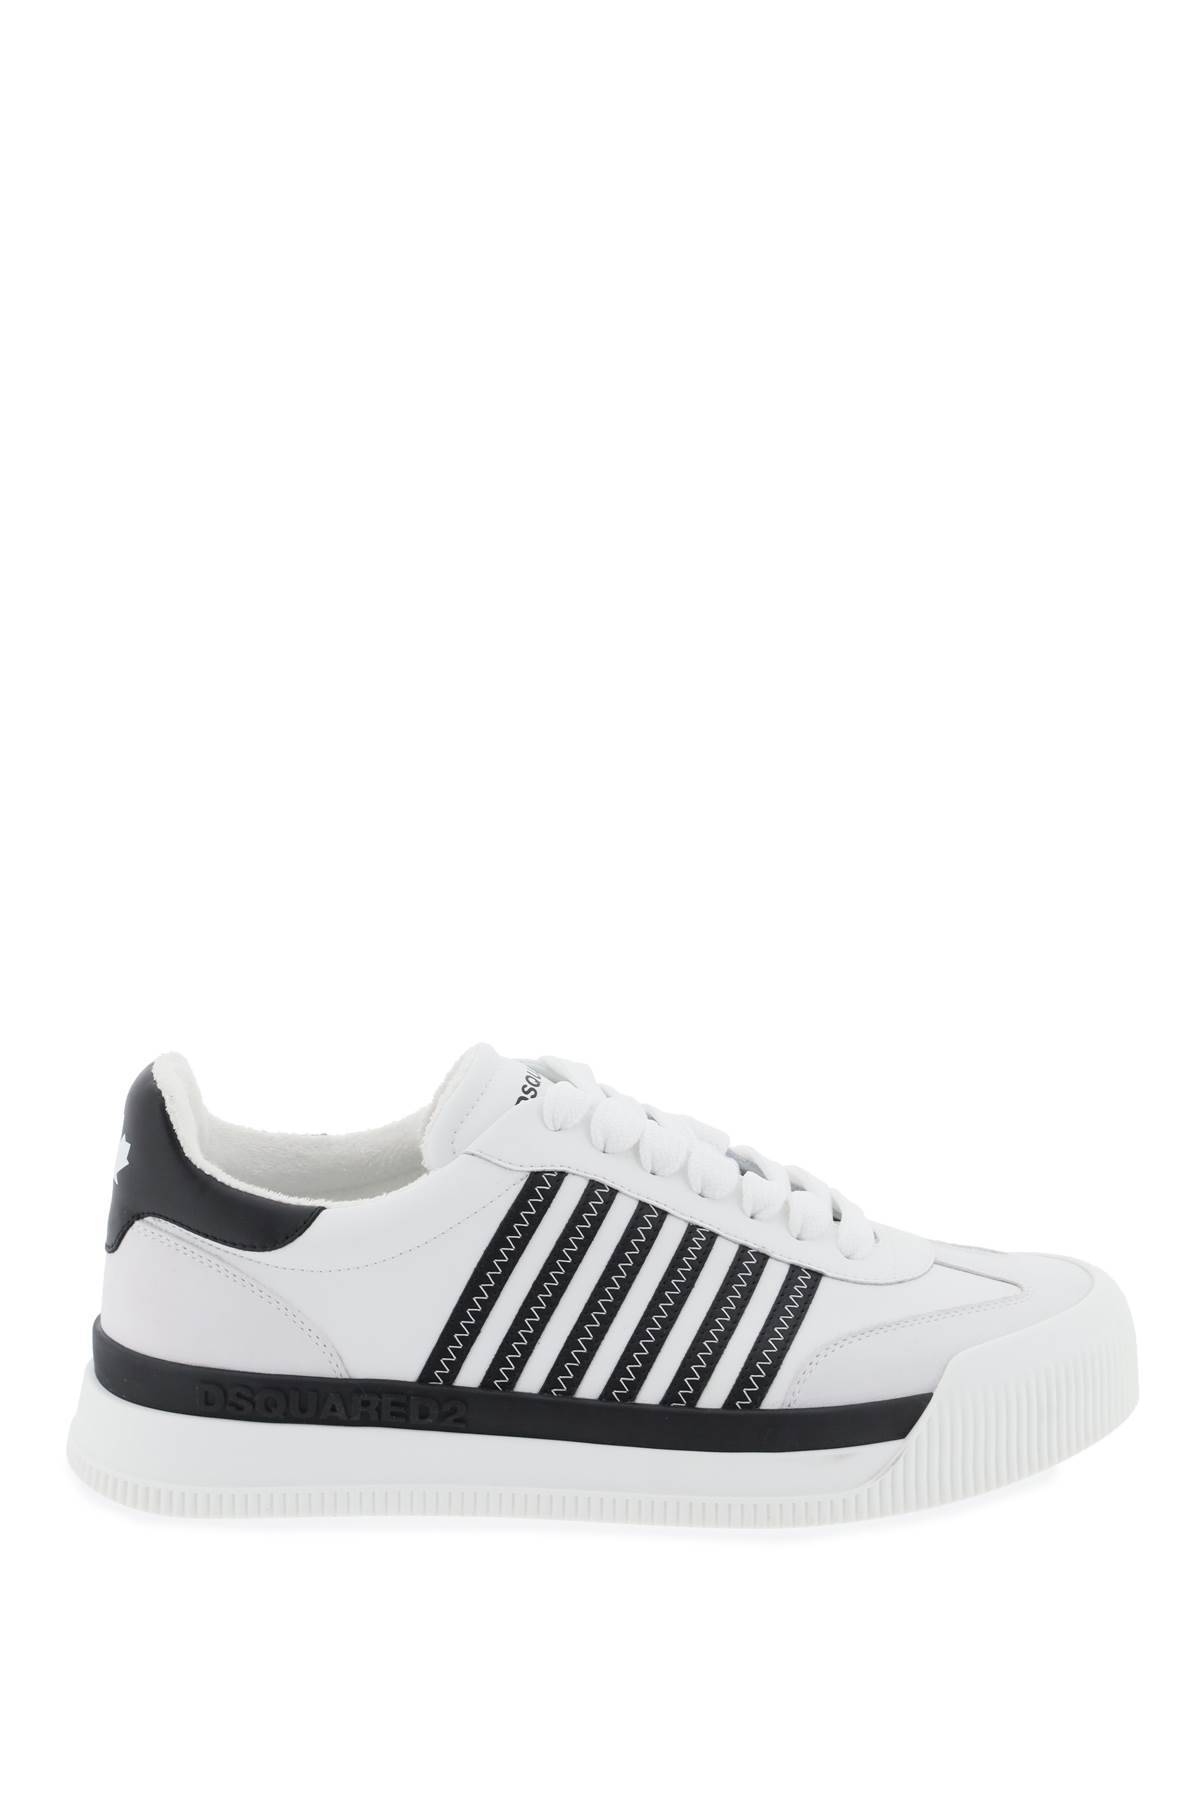 Shop Dsquared2 New Jersey Sneakers In White,black